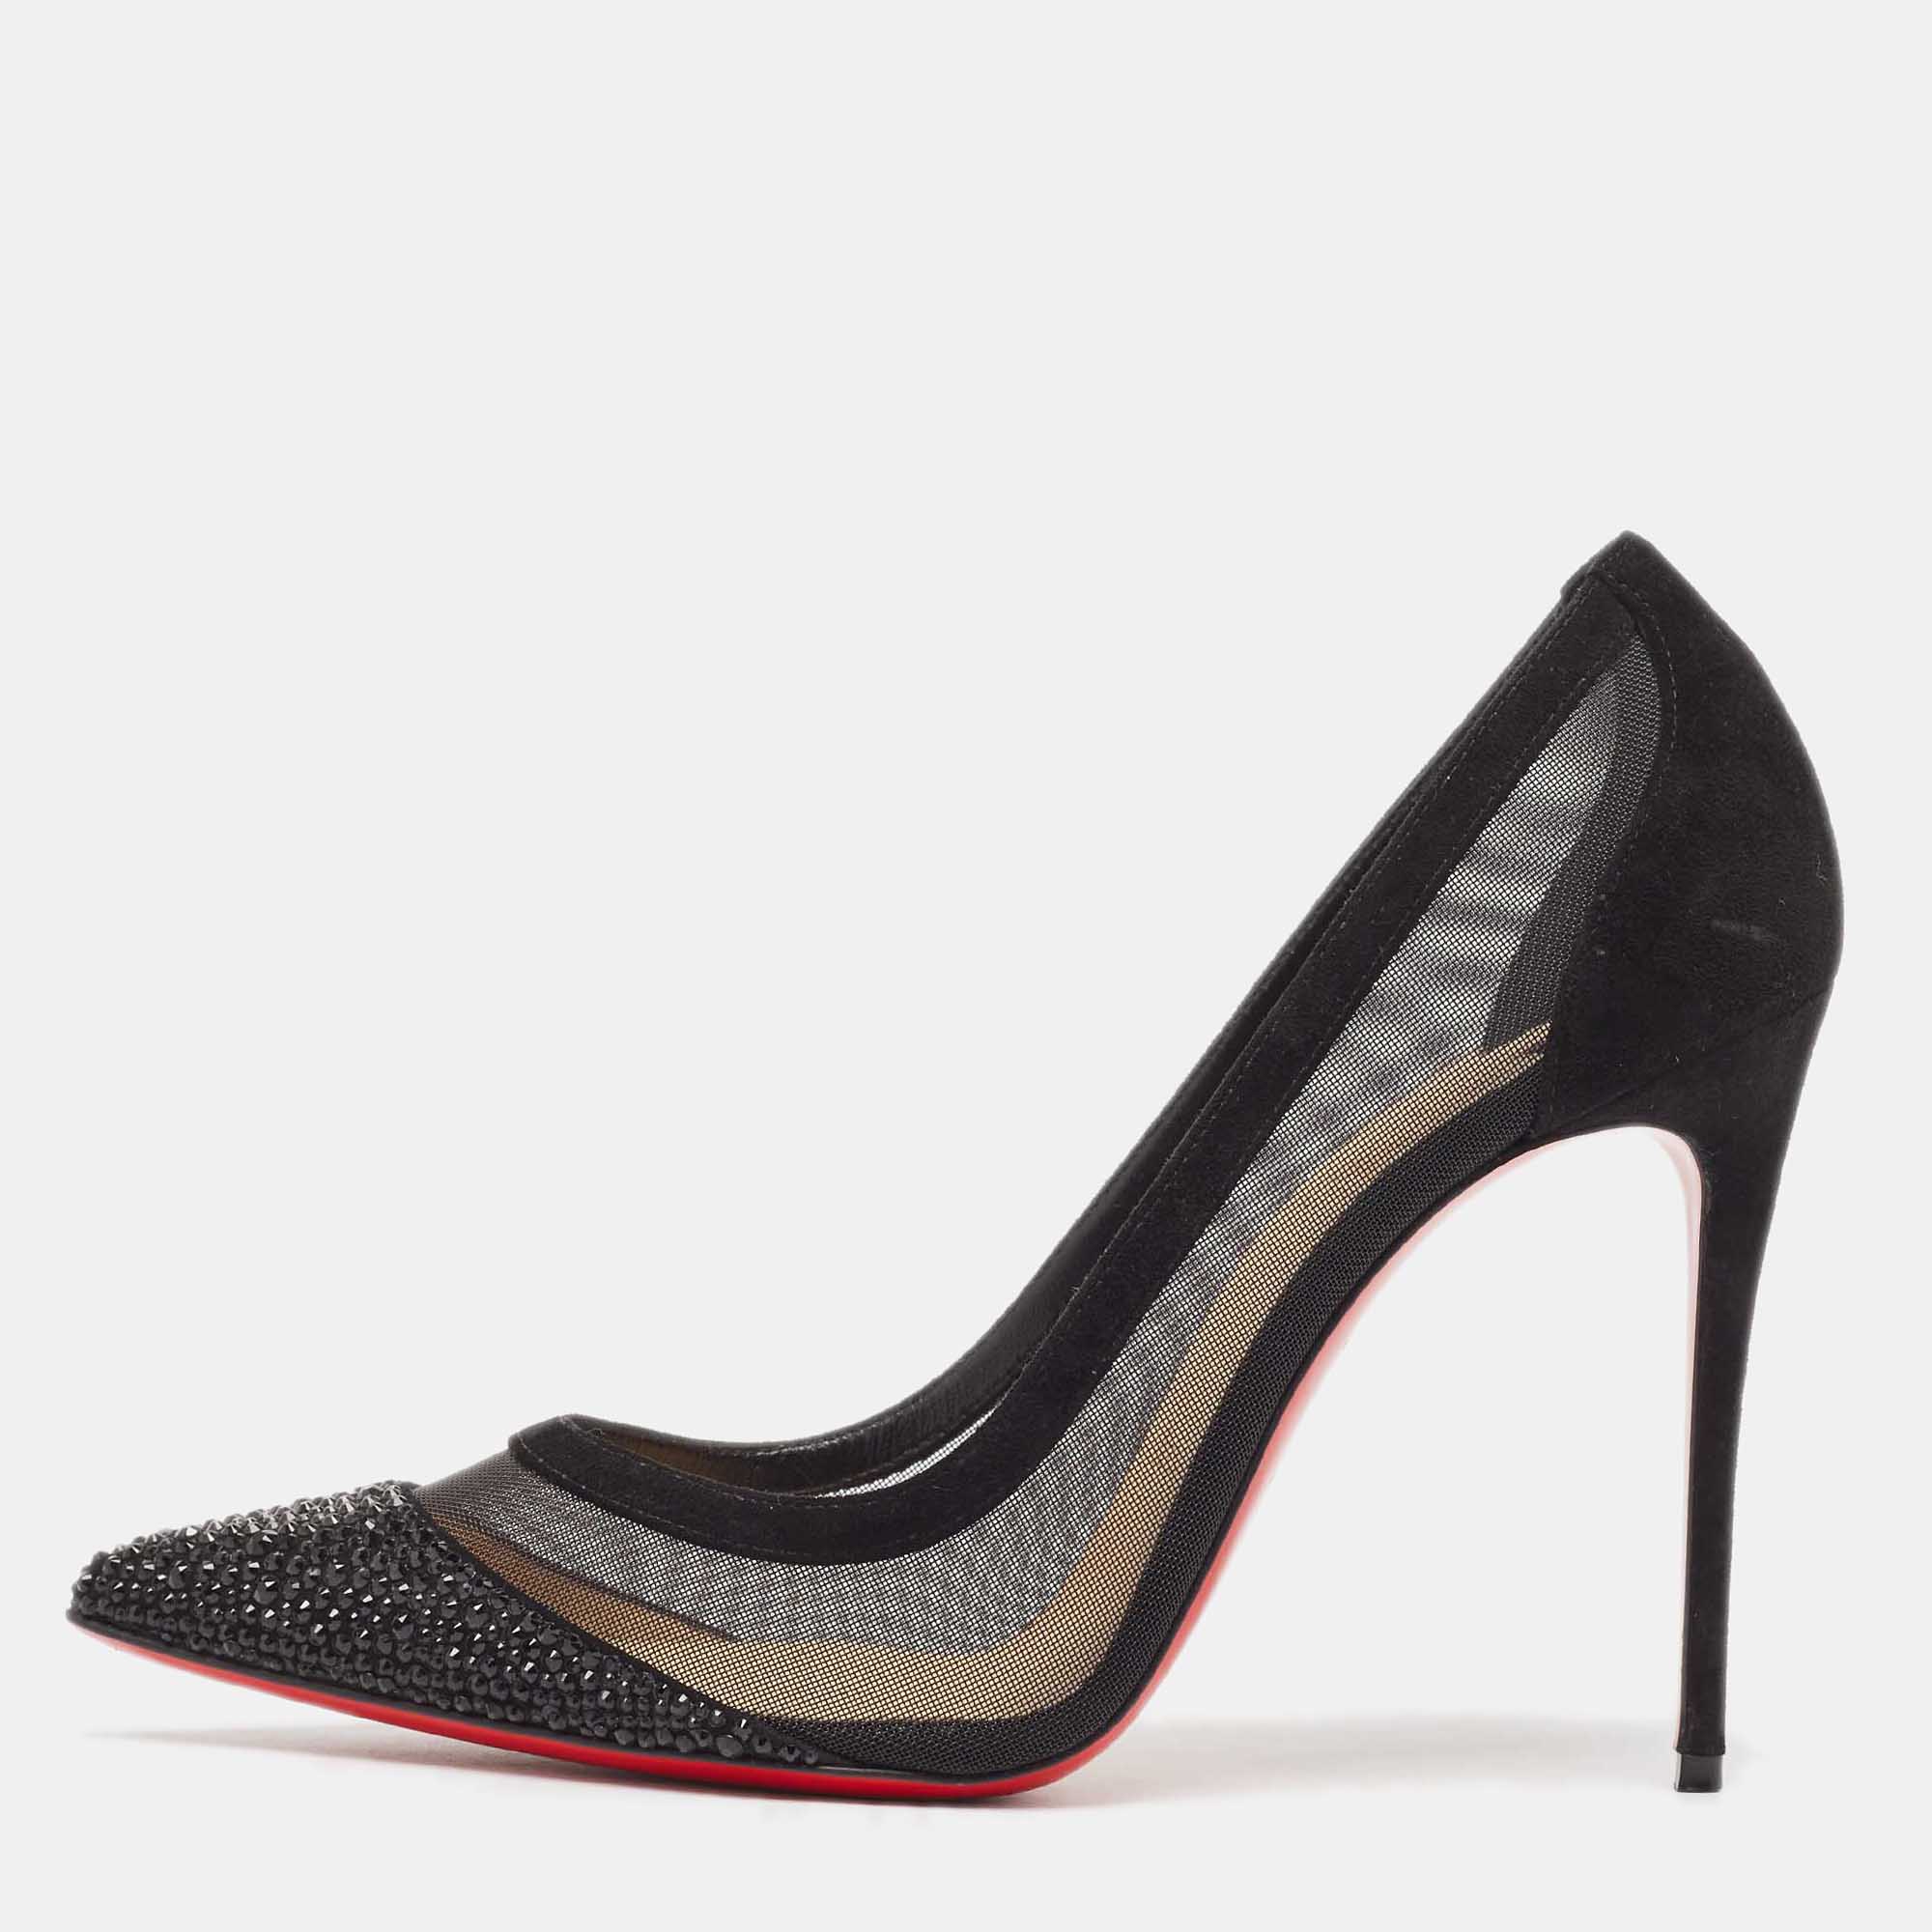 Christian louboutin black mesh and suede galativi strass pumps size 39.5